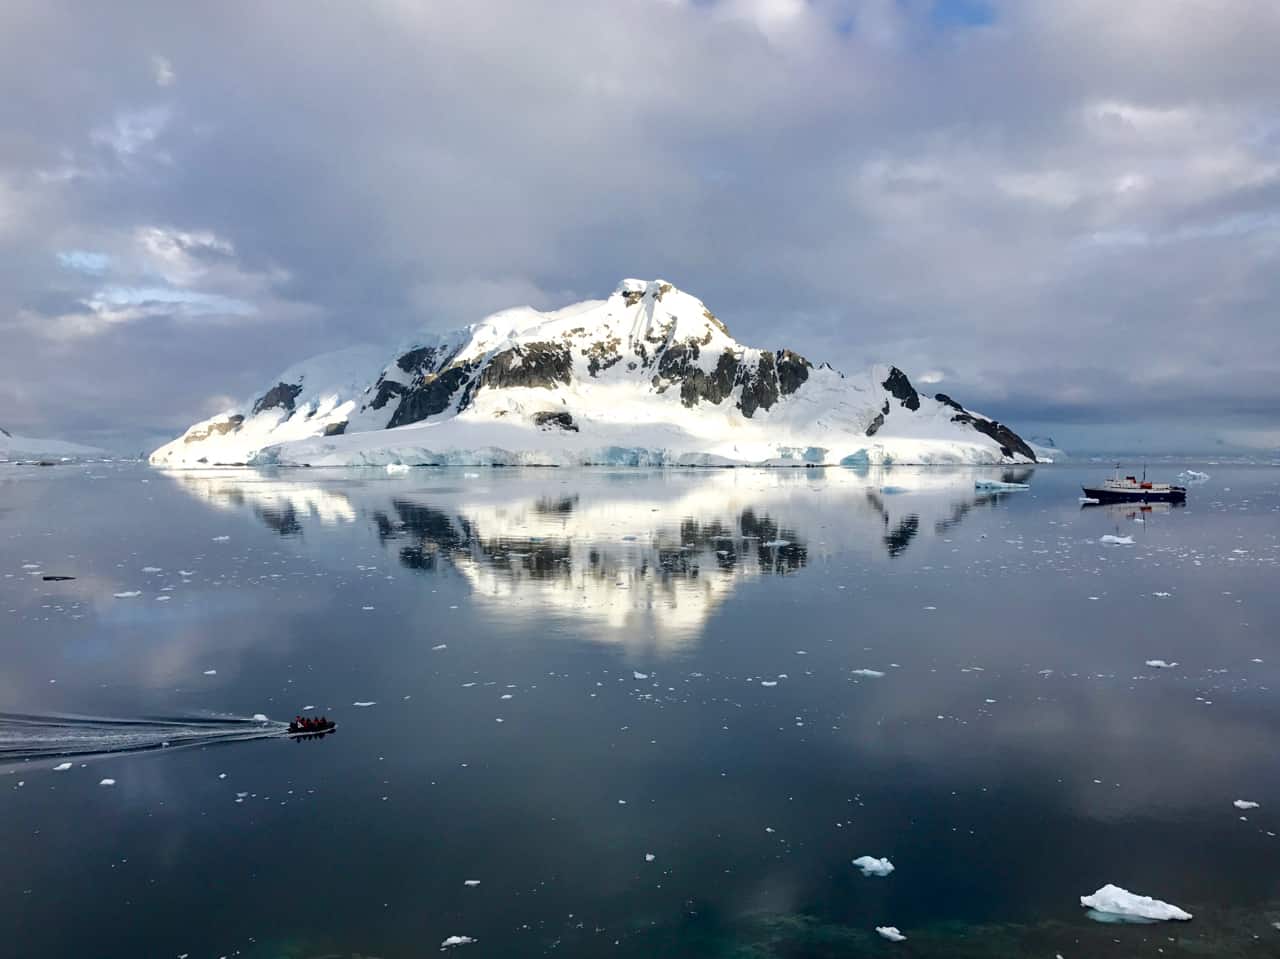 30 Photos Of Antarctica: Looking out over Paradise Harbour towards a large island and an expedition ship in Antarctica.